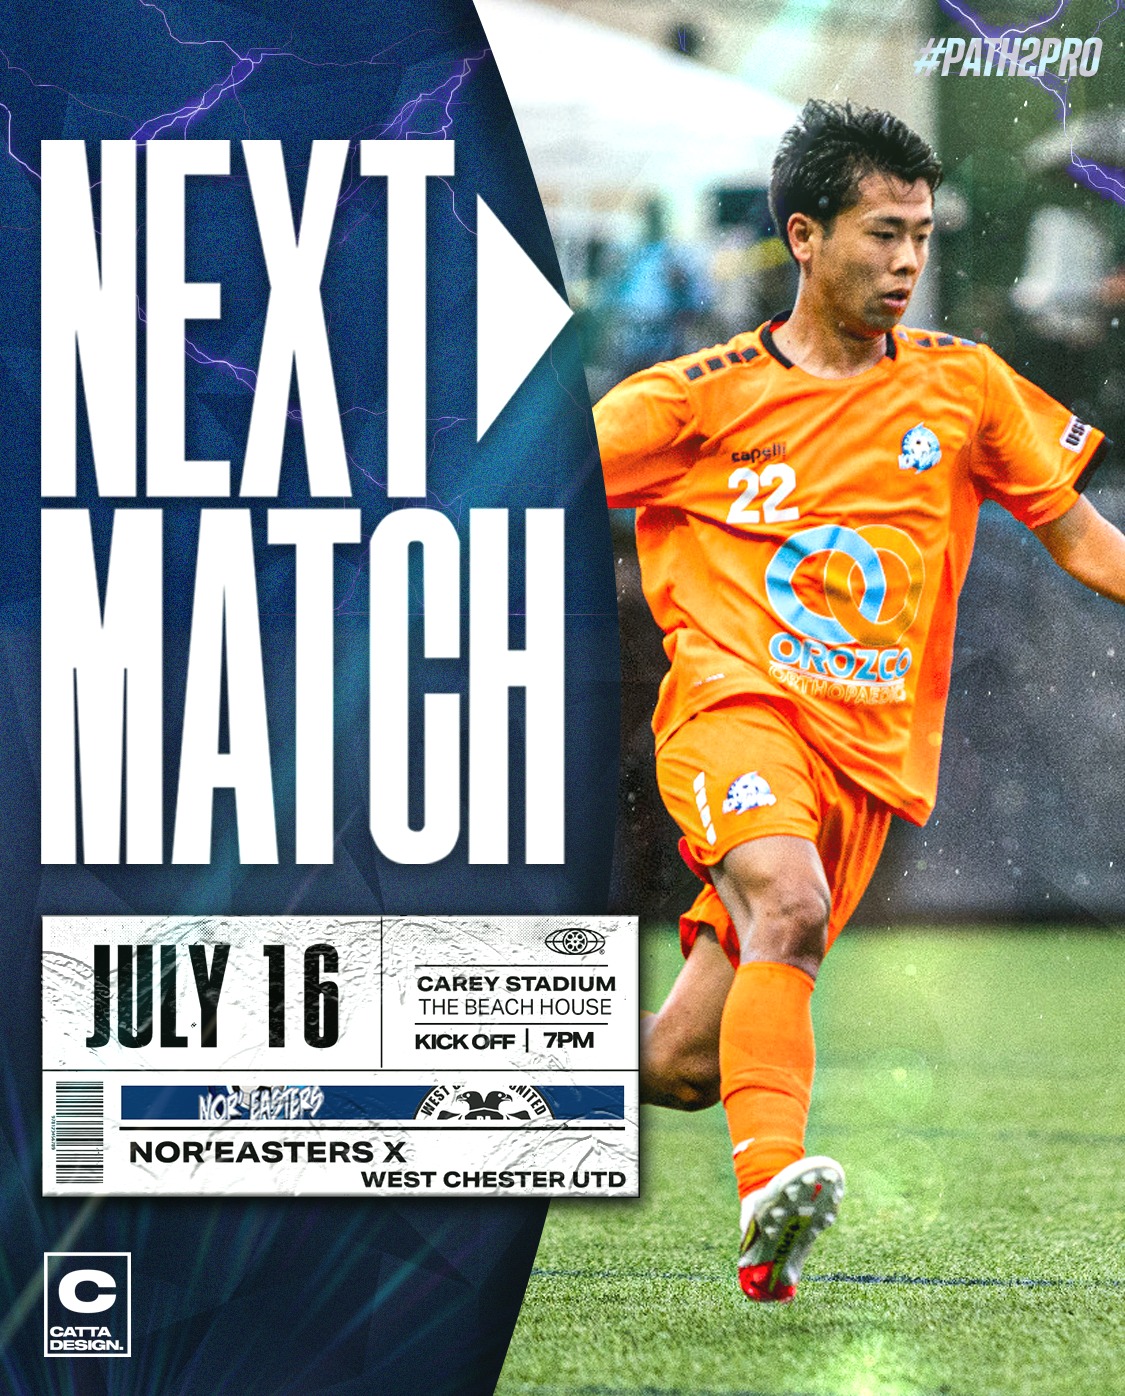 Preview: Nor'easters host West Chester United trying to complete historic undefeated regular season